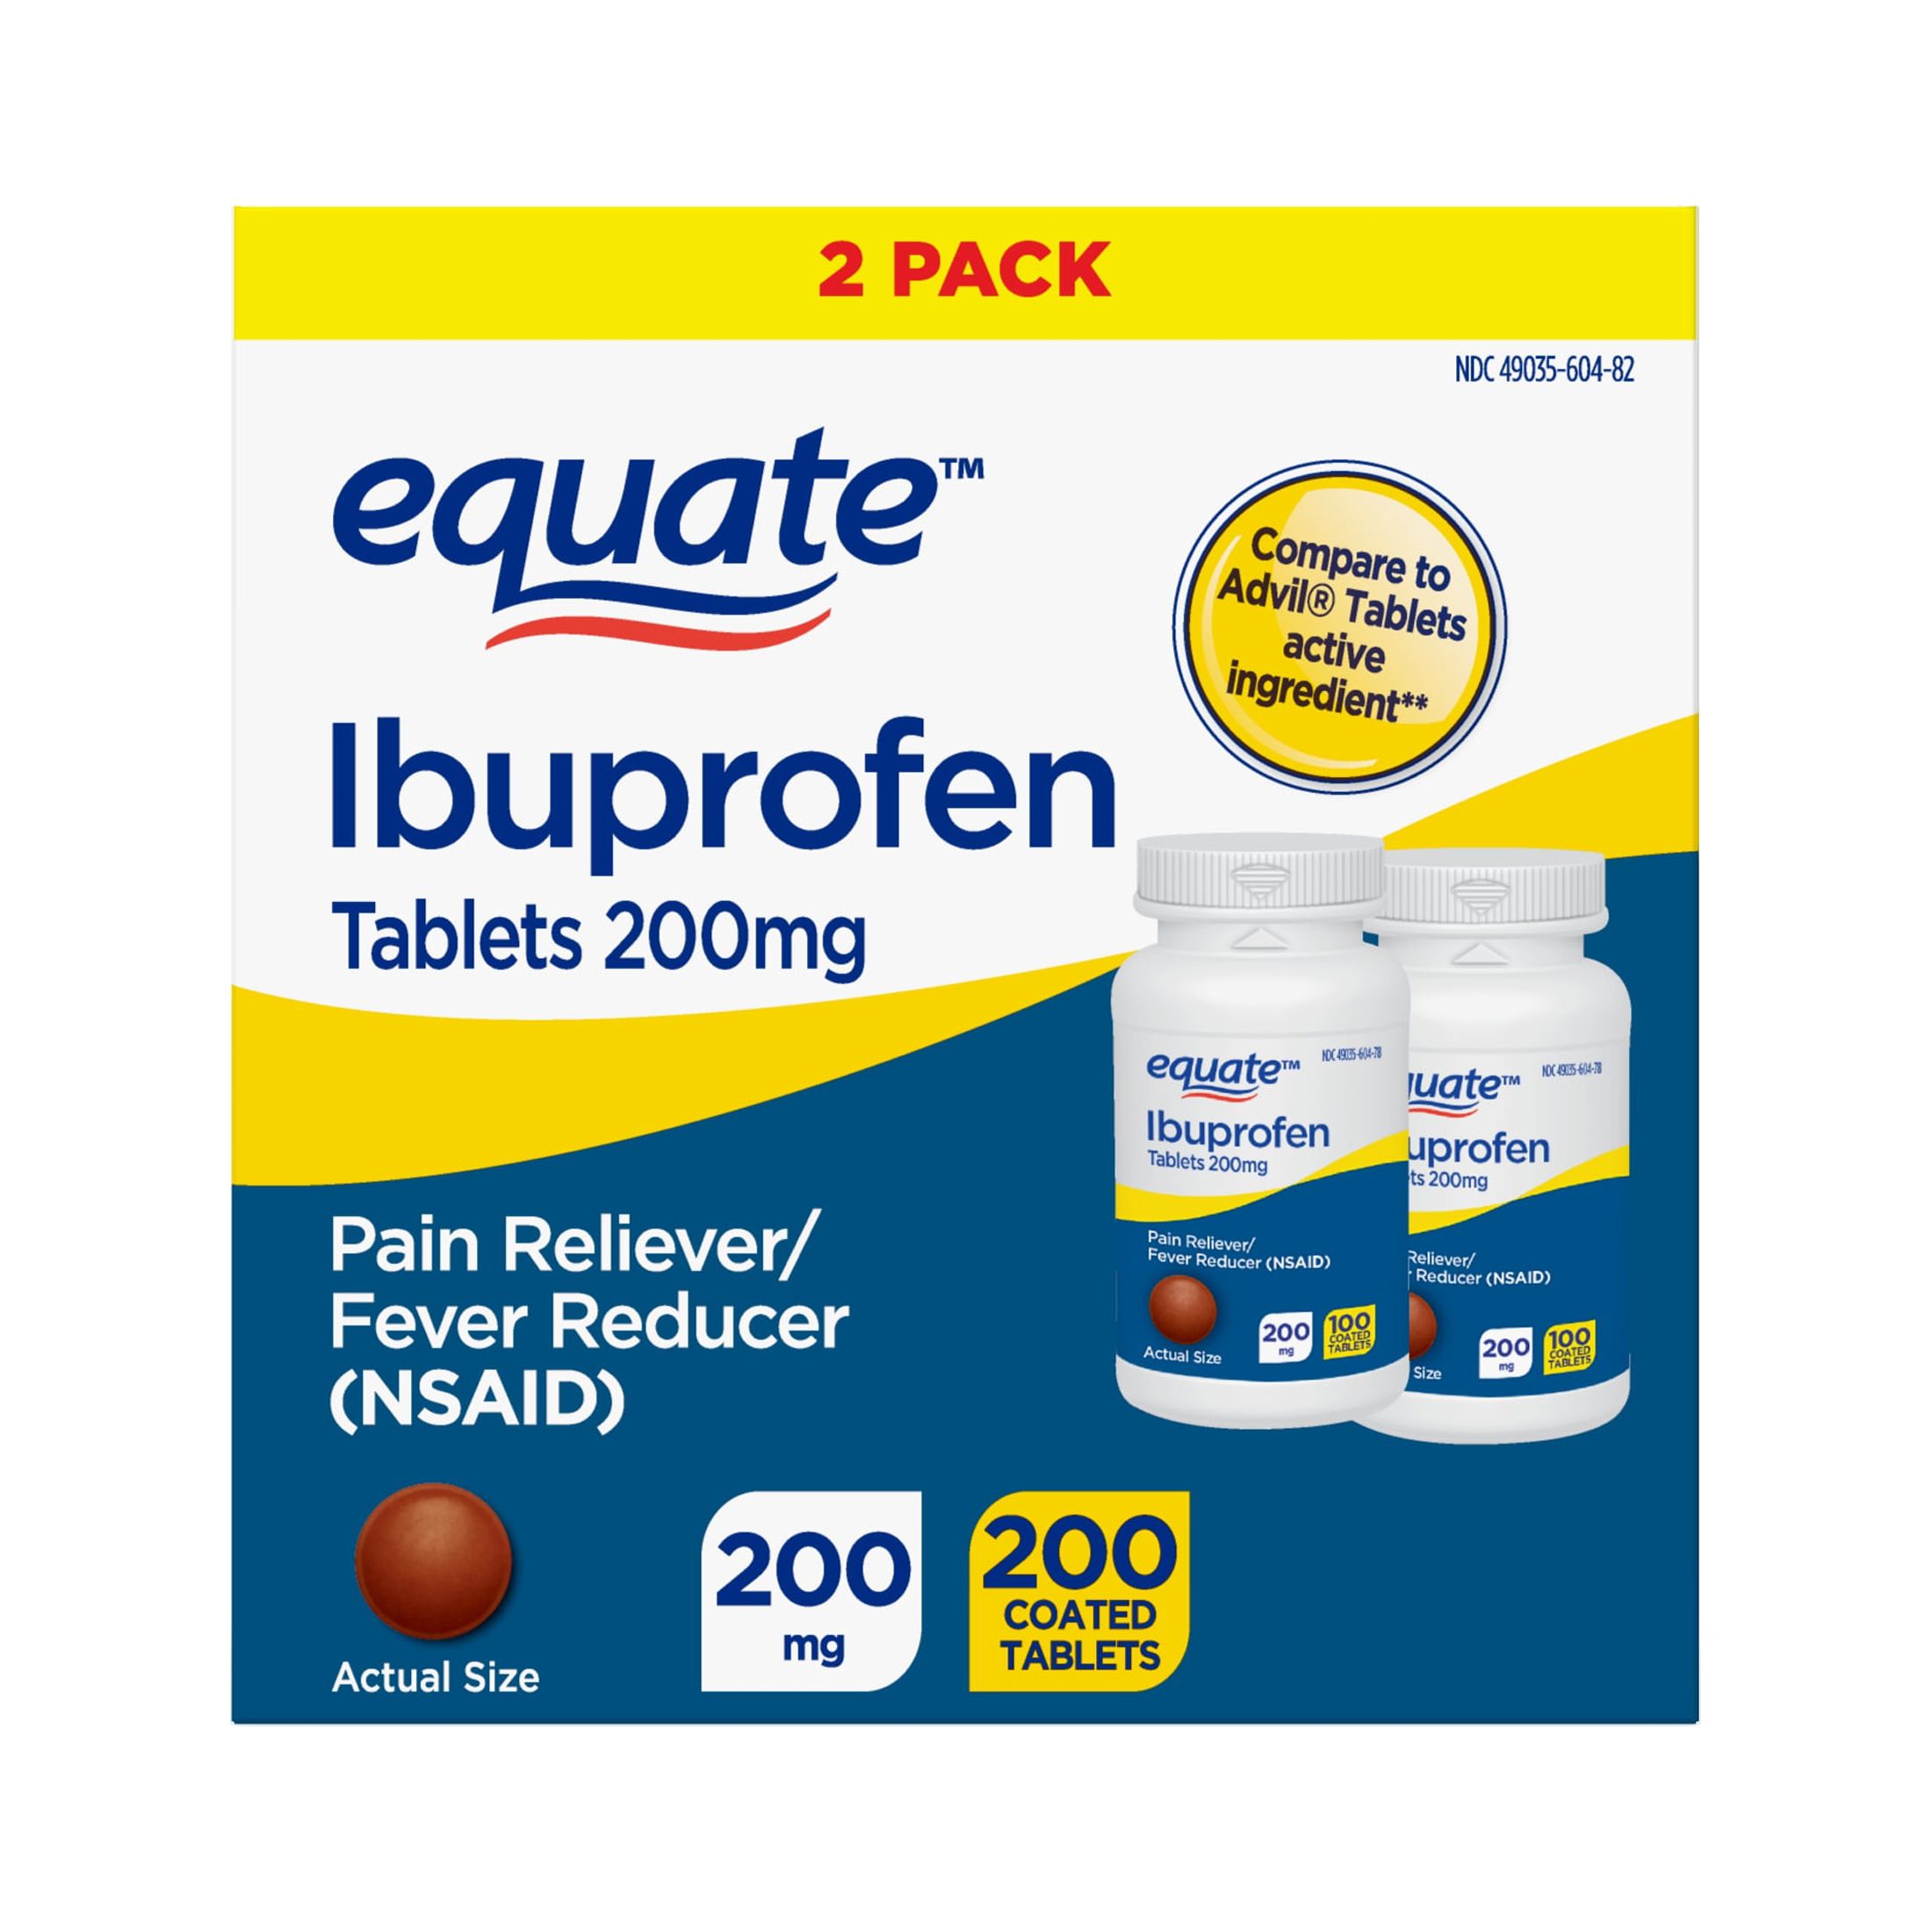 Equate Ibuprofen Tablets 200 mg, Pain Reliever/Fever Reducer, 2 Pack, 200 Count - image 1 of 8